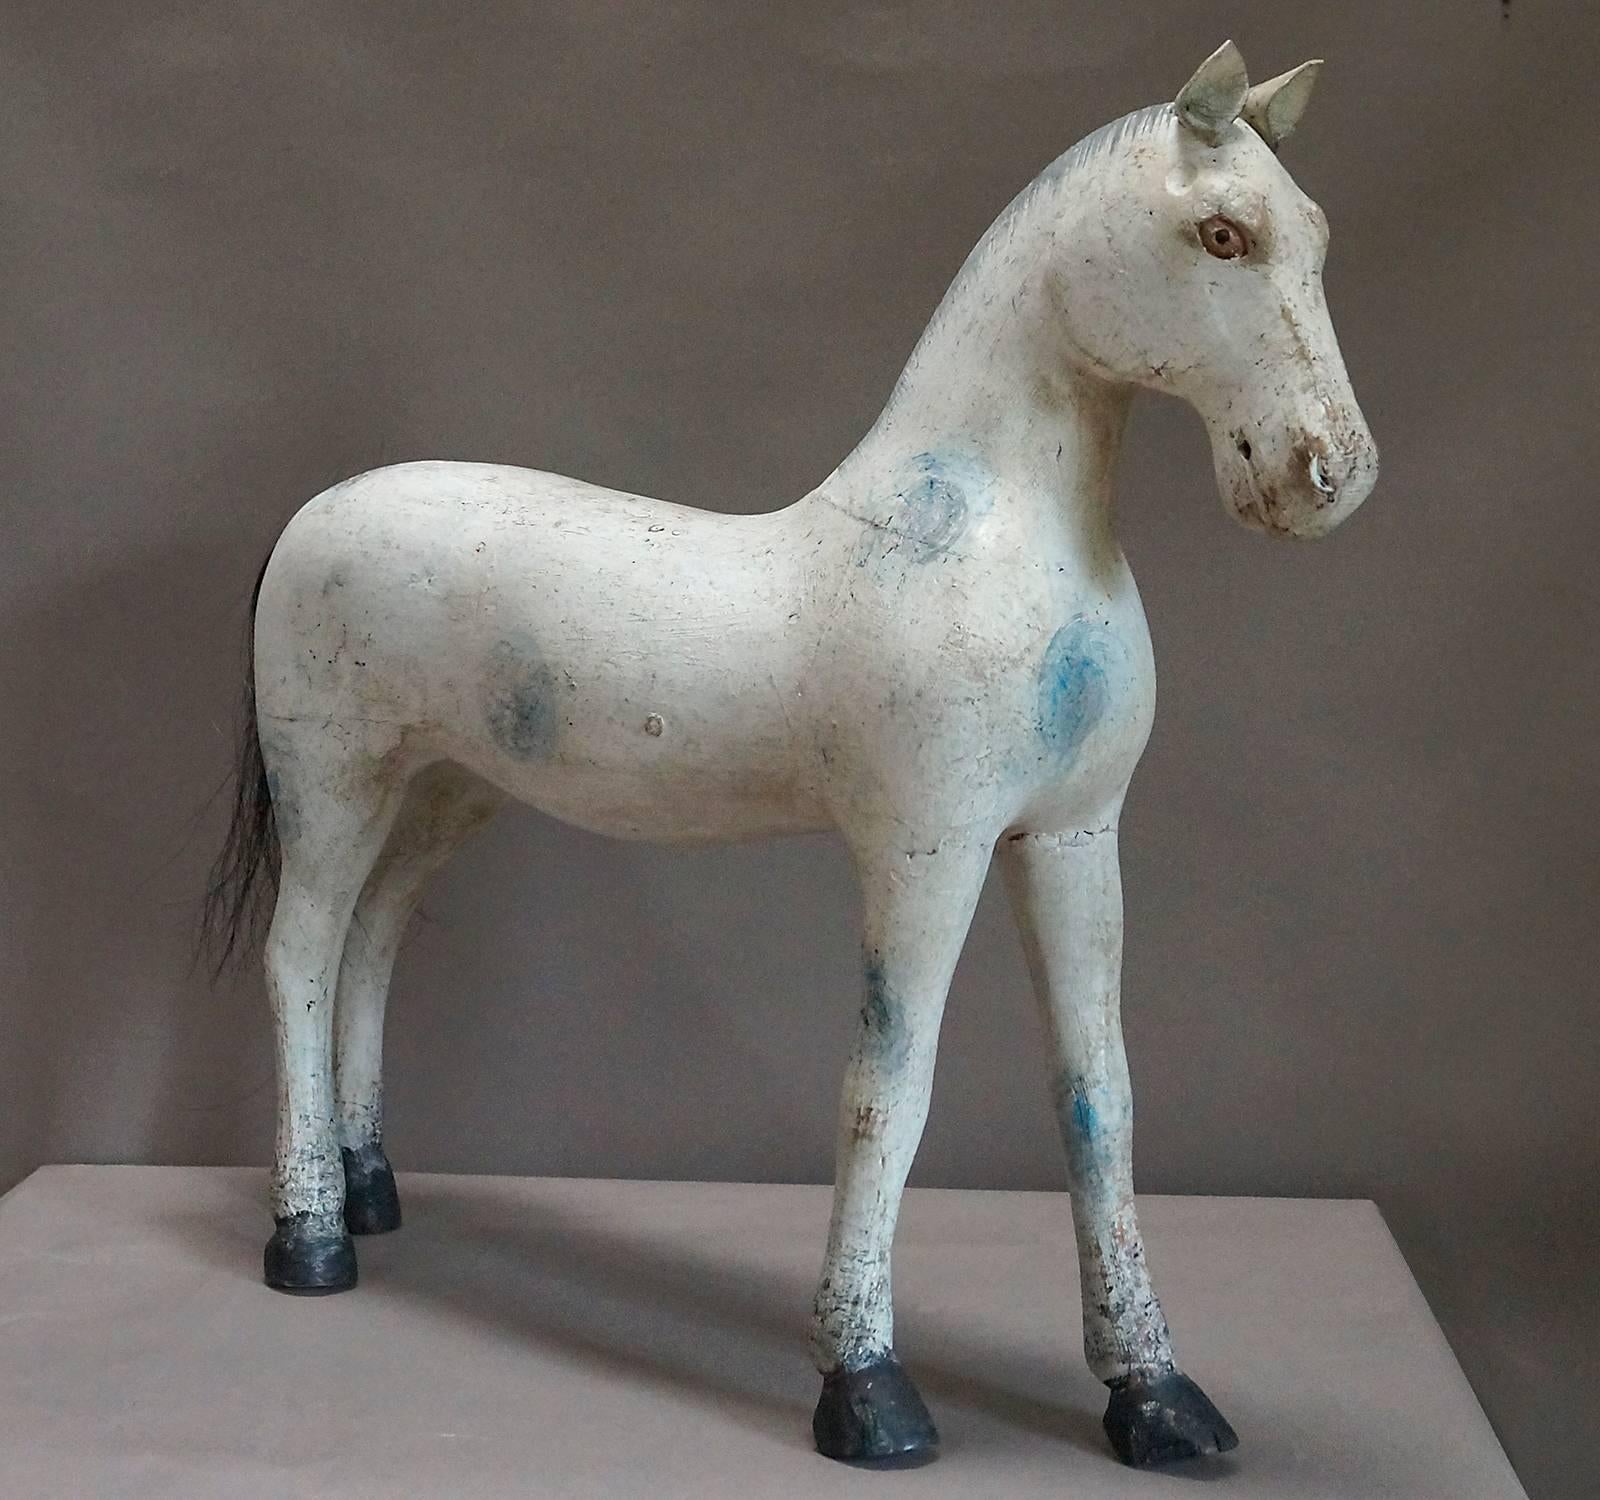 Carved horse, circa 1870, from the famous toy factory in Gemla, Småland, in southern Sweden. His white coat is decorated with faded blue spots, and his eyes are painted an amber color. Leather ears, painted mane, and real horse hair tail.